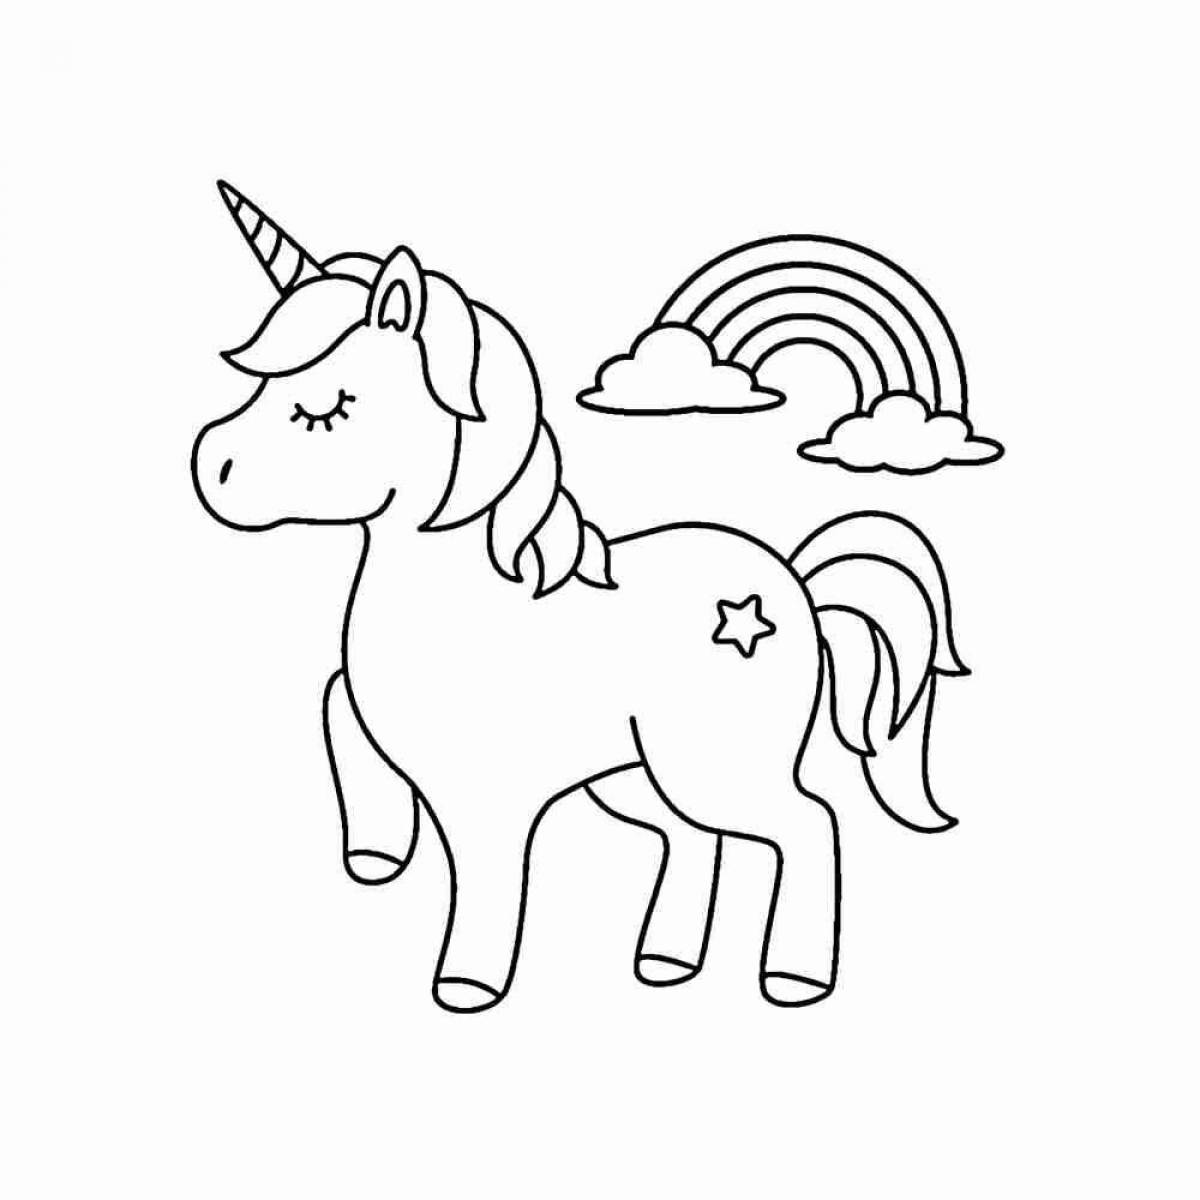 Sparkly coloring pages for 5-6 year olds unicorns